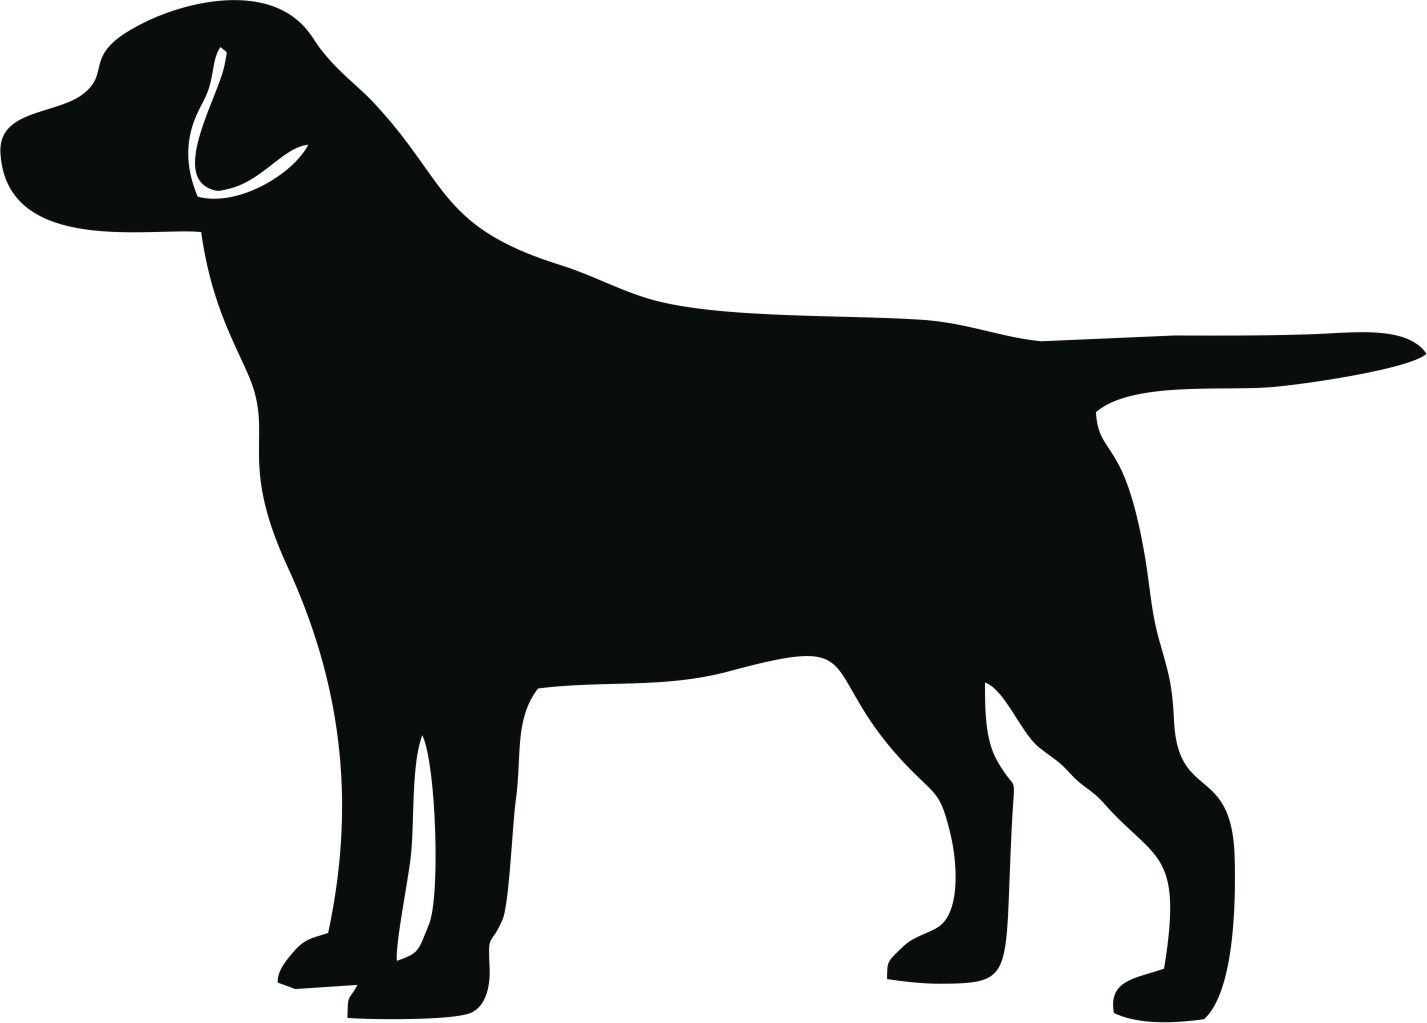 Hunting Dog Silhouette Clipart   Free Clip Art Images